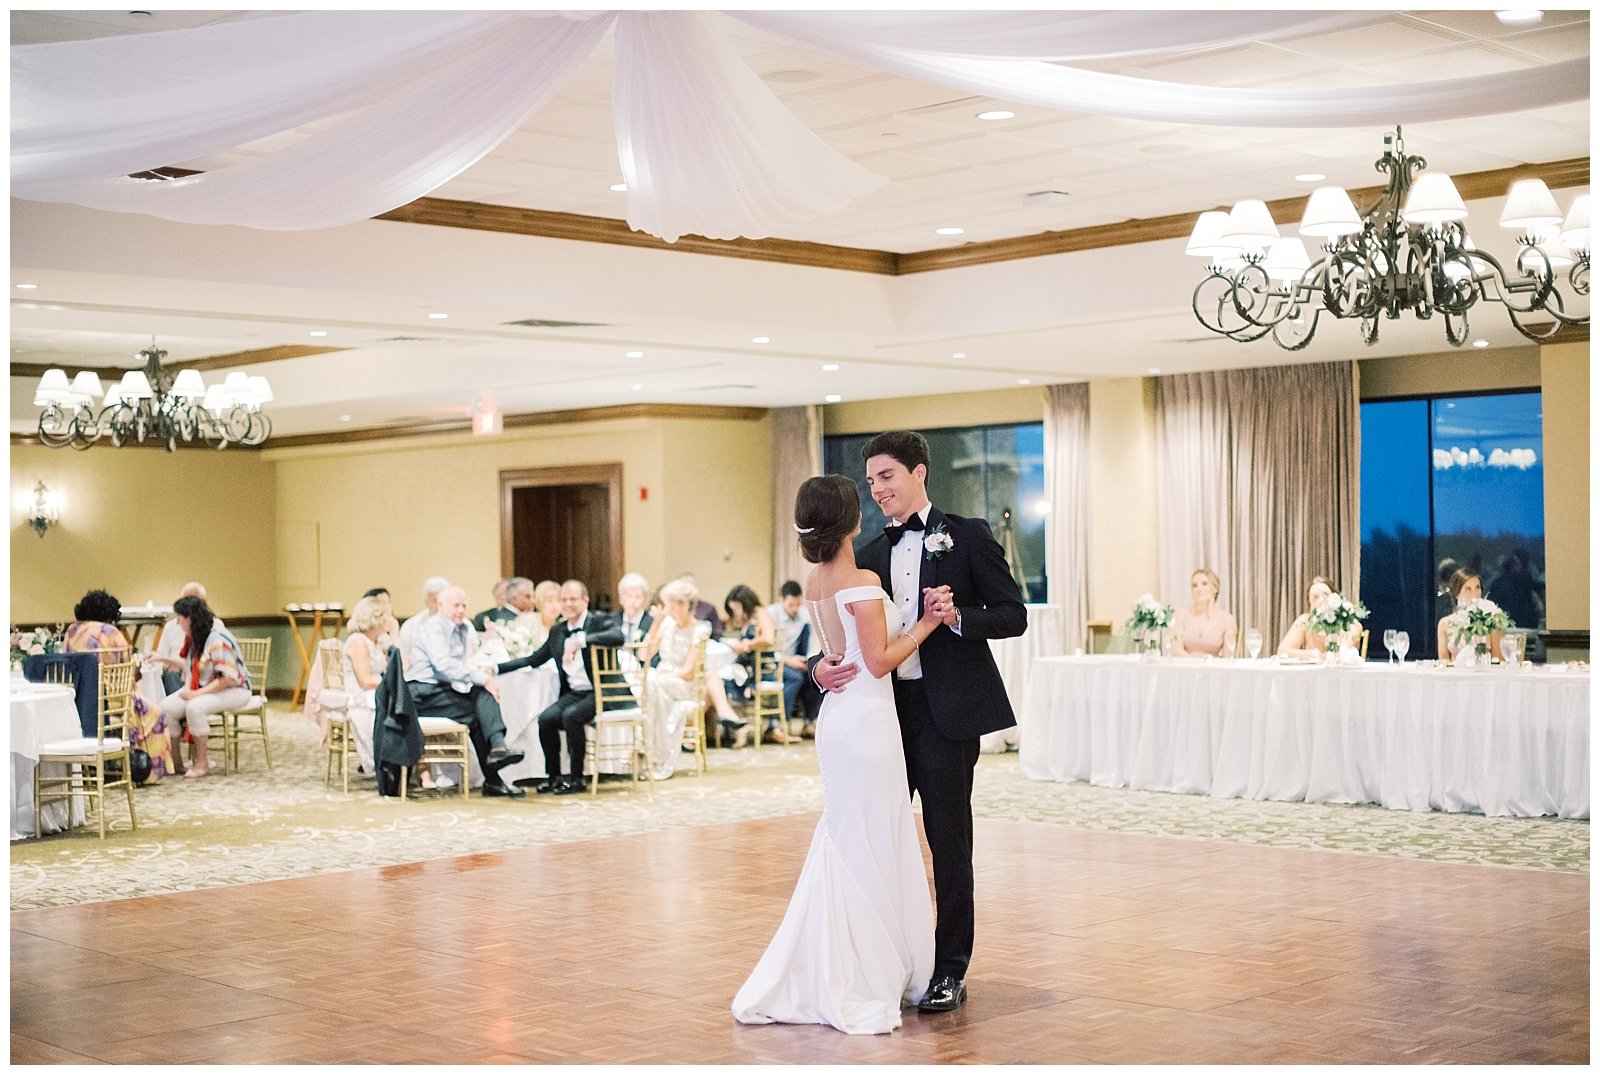 Bride and groom first dance at their Grand Geneva wedding